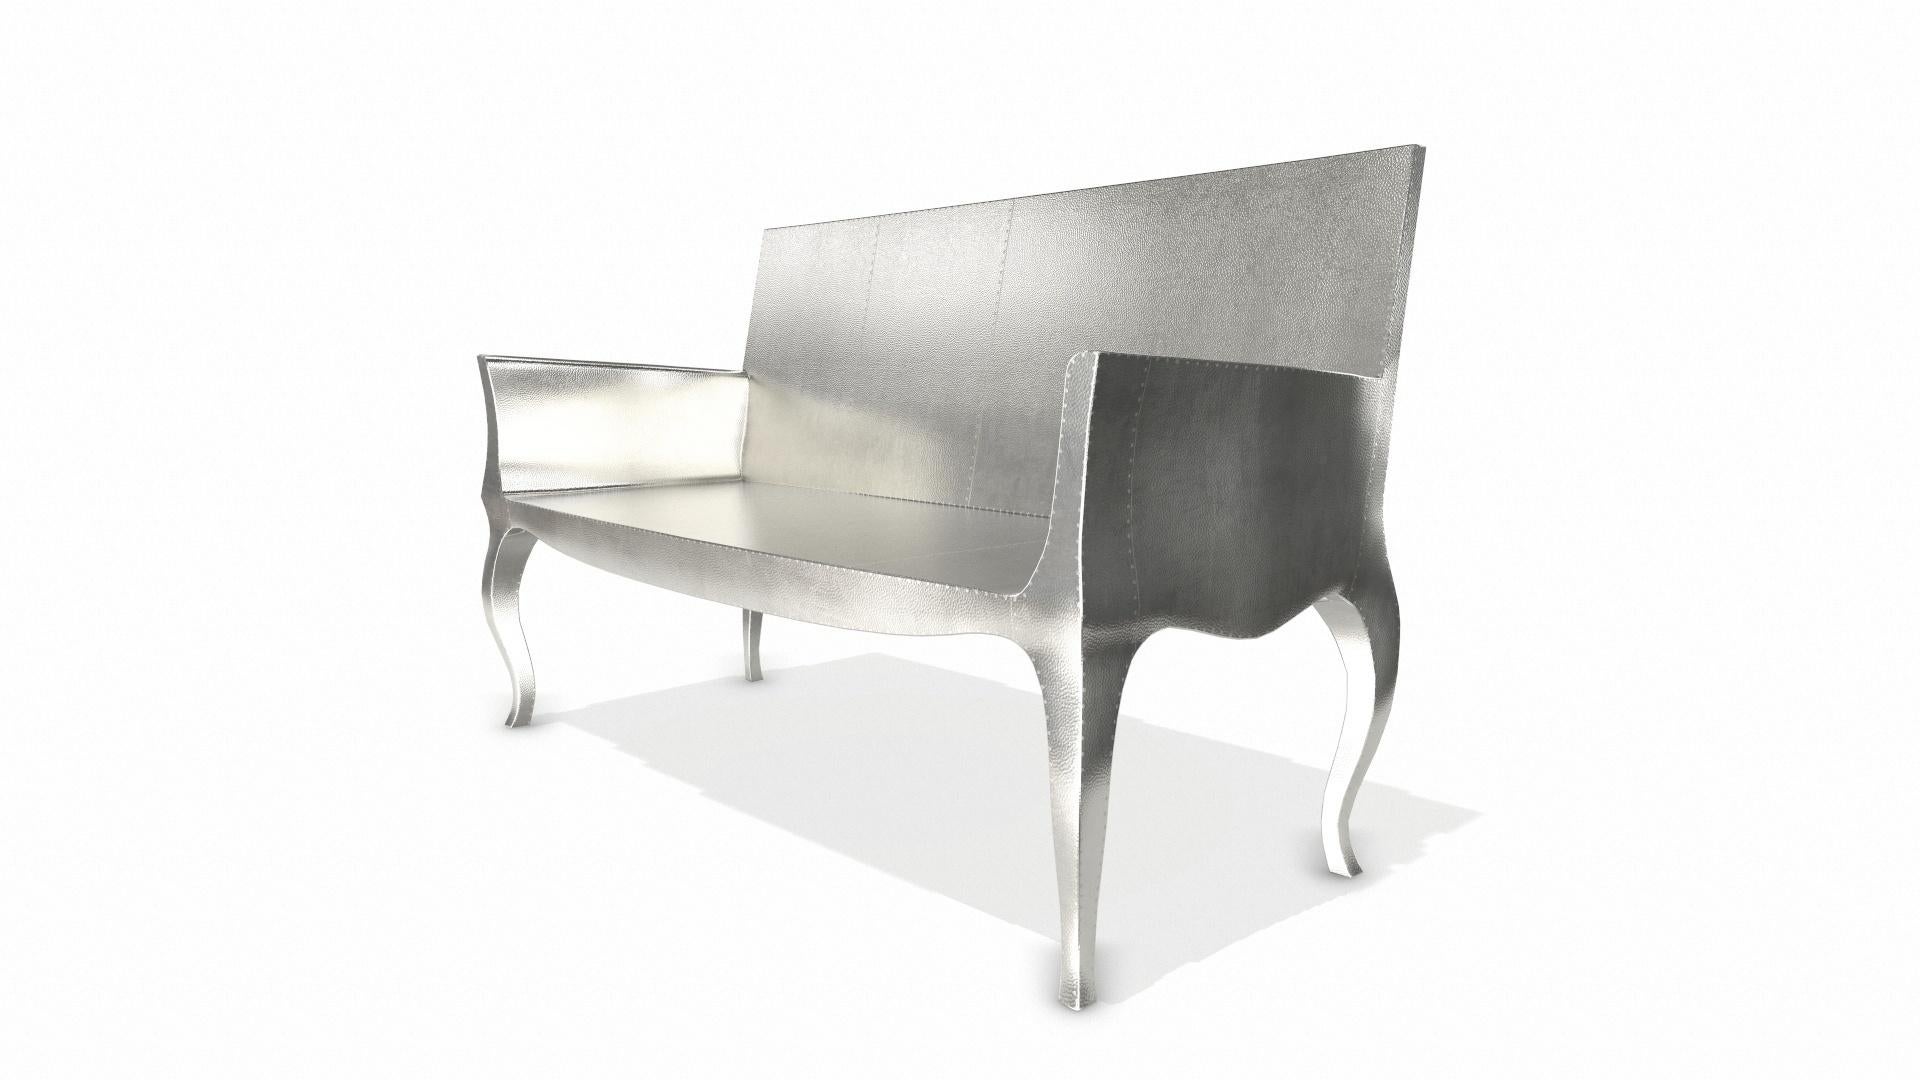 Hand-Crafted Louise Settee Art Deco Lounge Chairs in Mid. Hammered White Bronze  For Sale